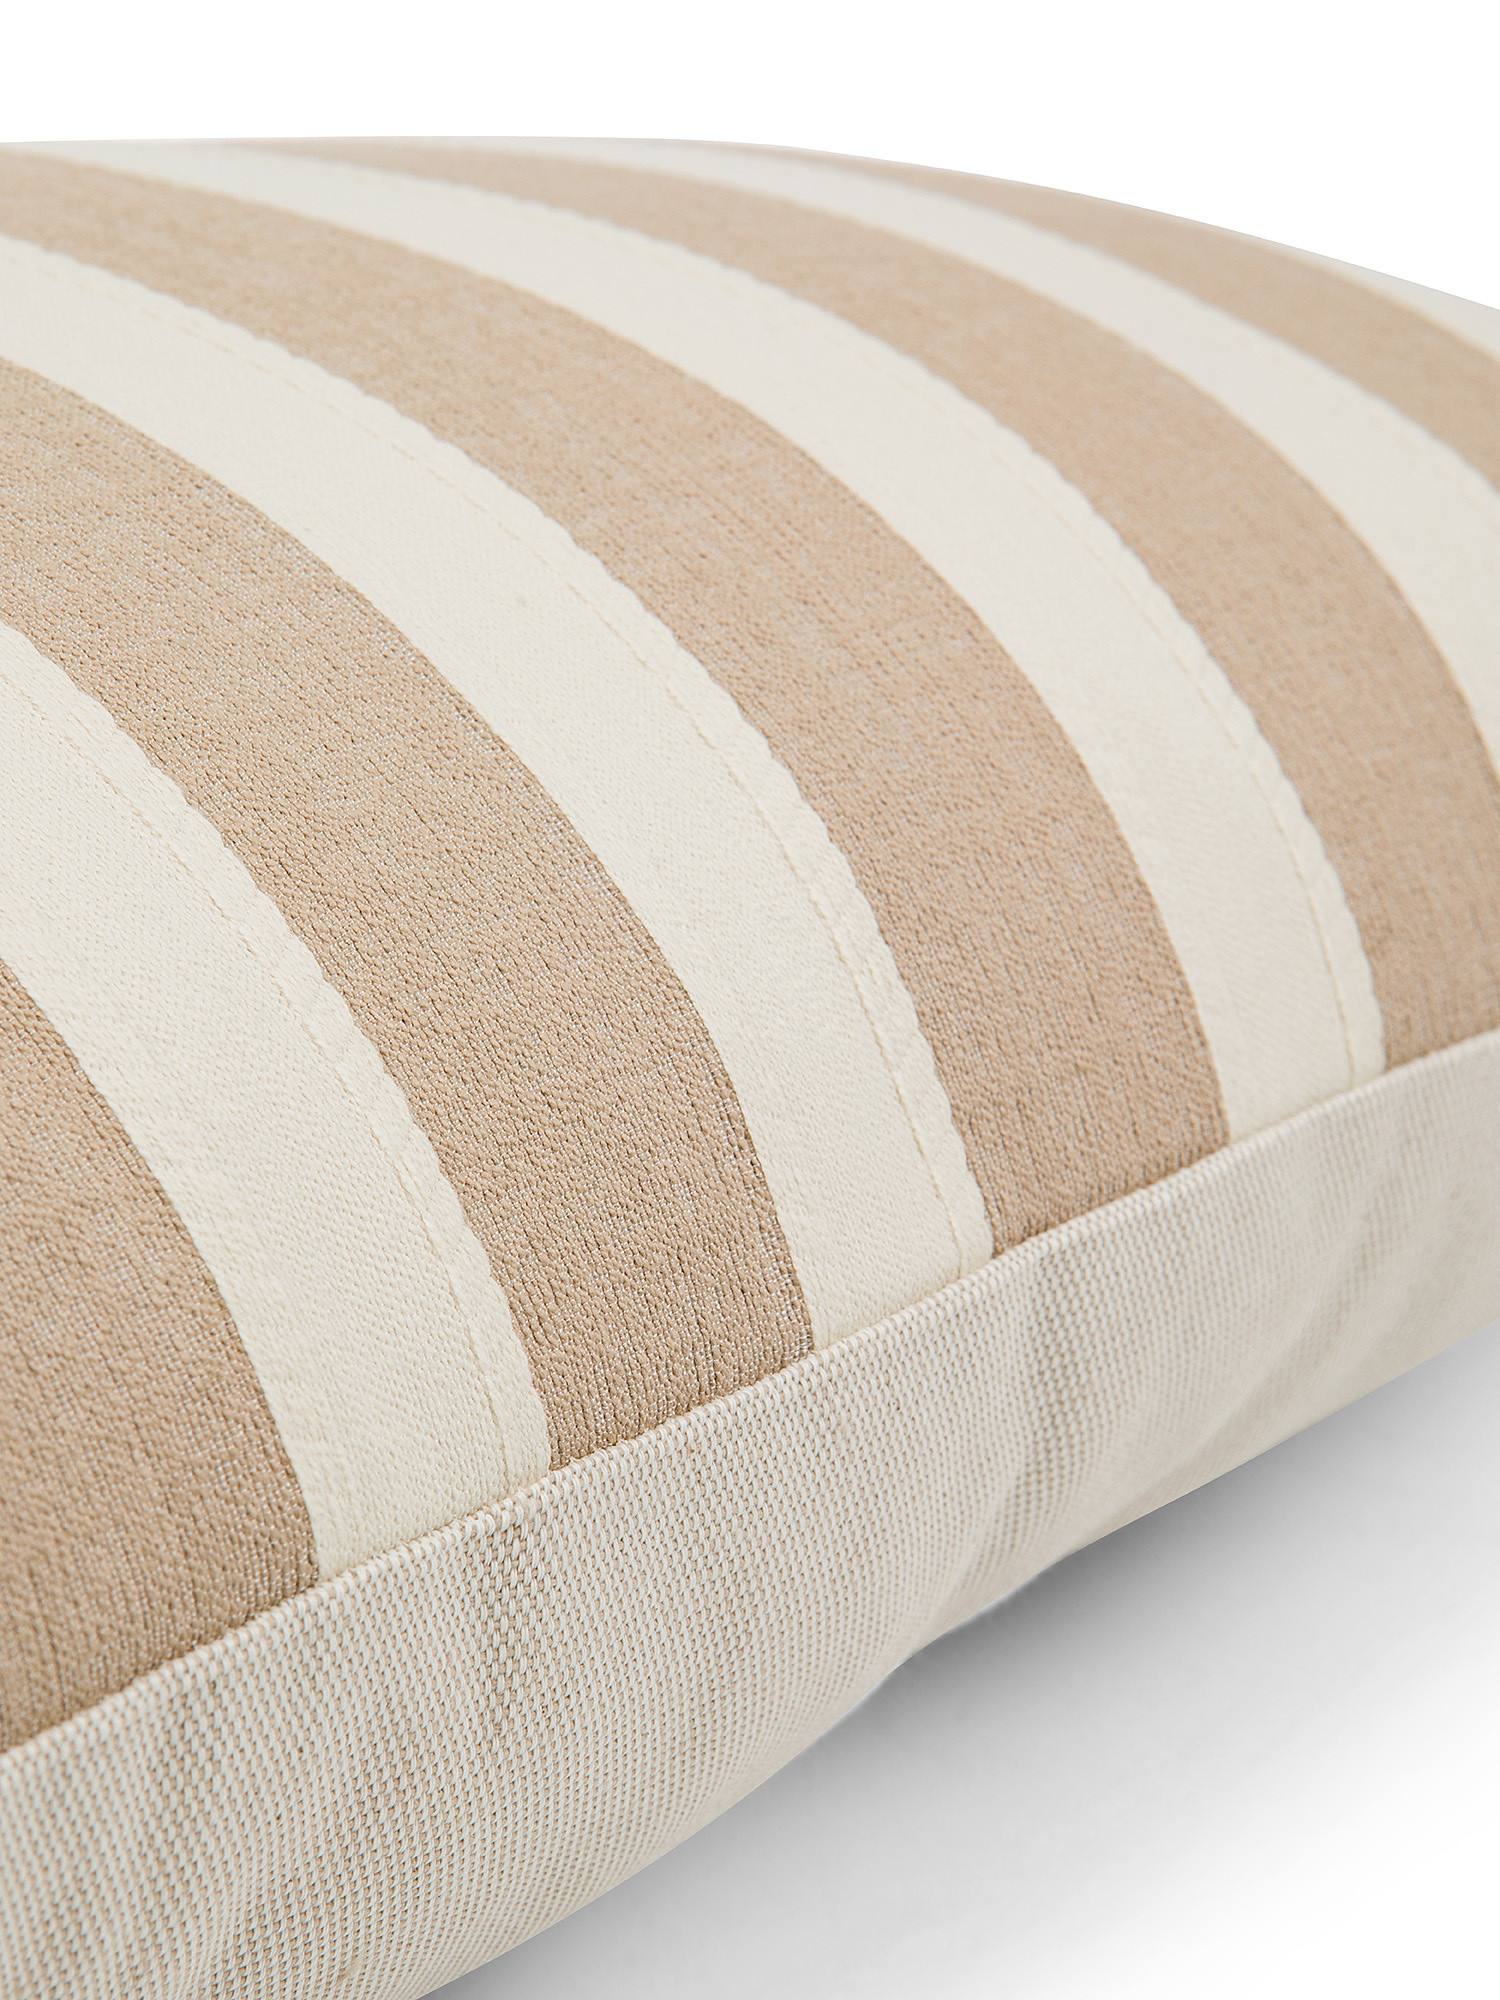 Cushion 35x55 cm with striped pattern, White / Beige, large image number 2